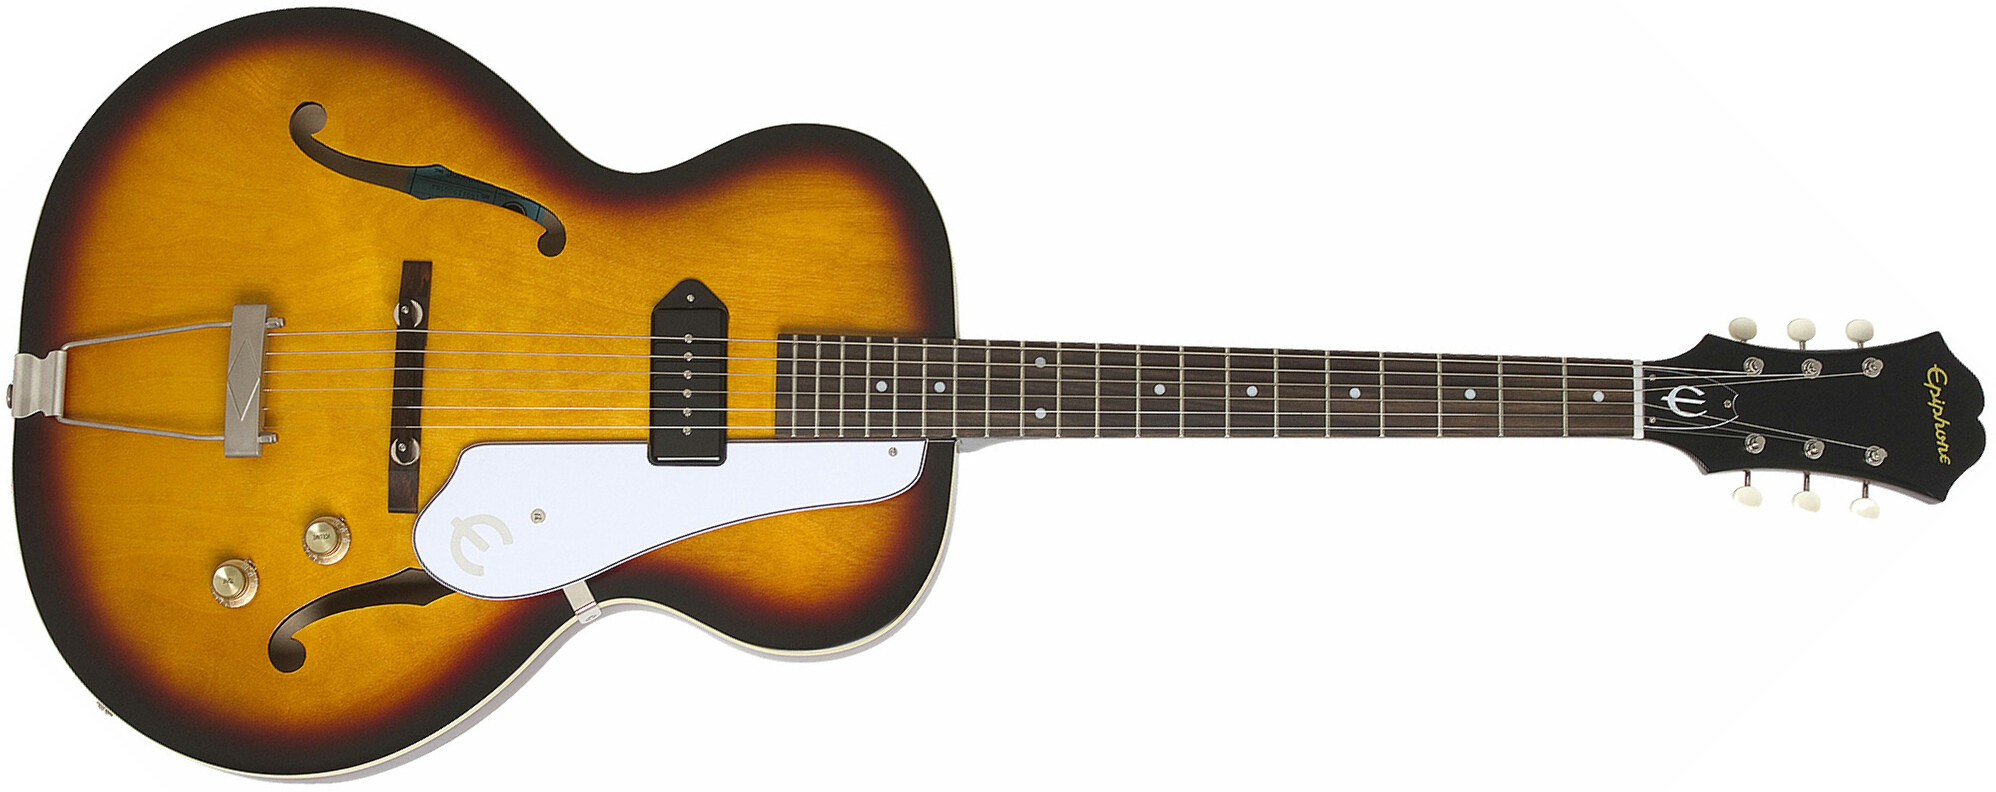 Epiphone Inspired By 1966 Century 2016 - Aged Gloss Vintage Sunburst - Semi-Hollow E-Gitarre - Main picture